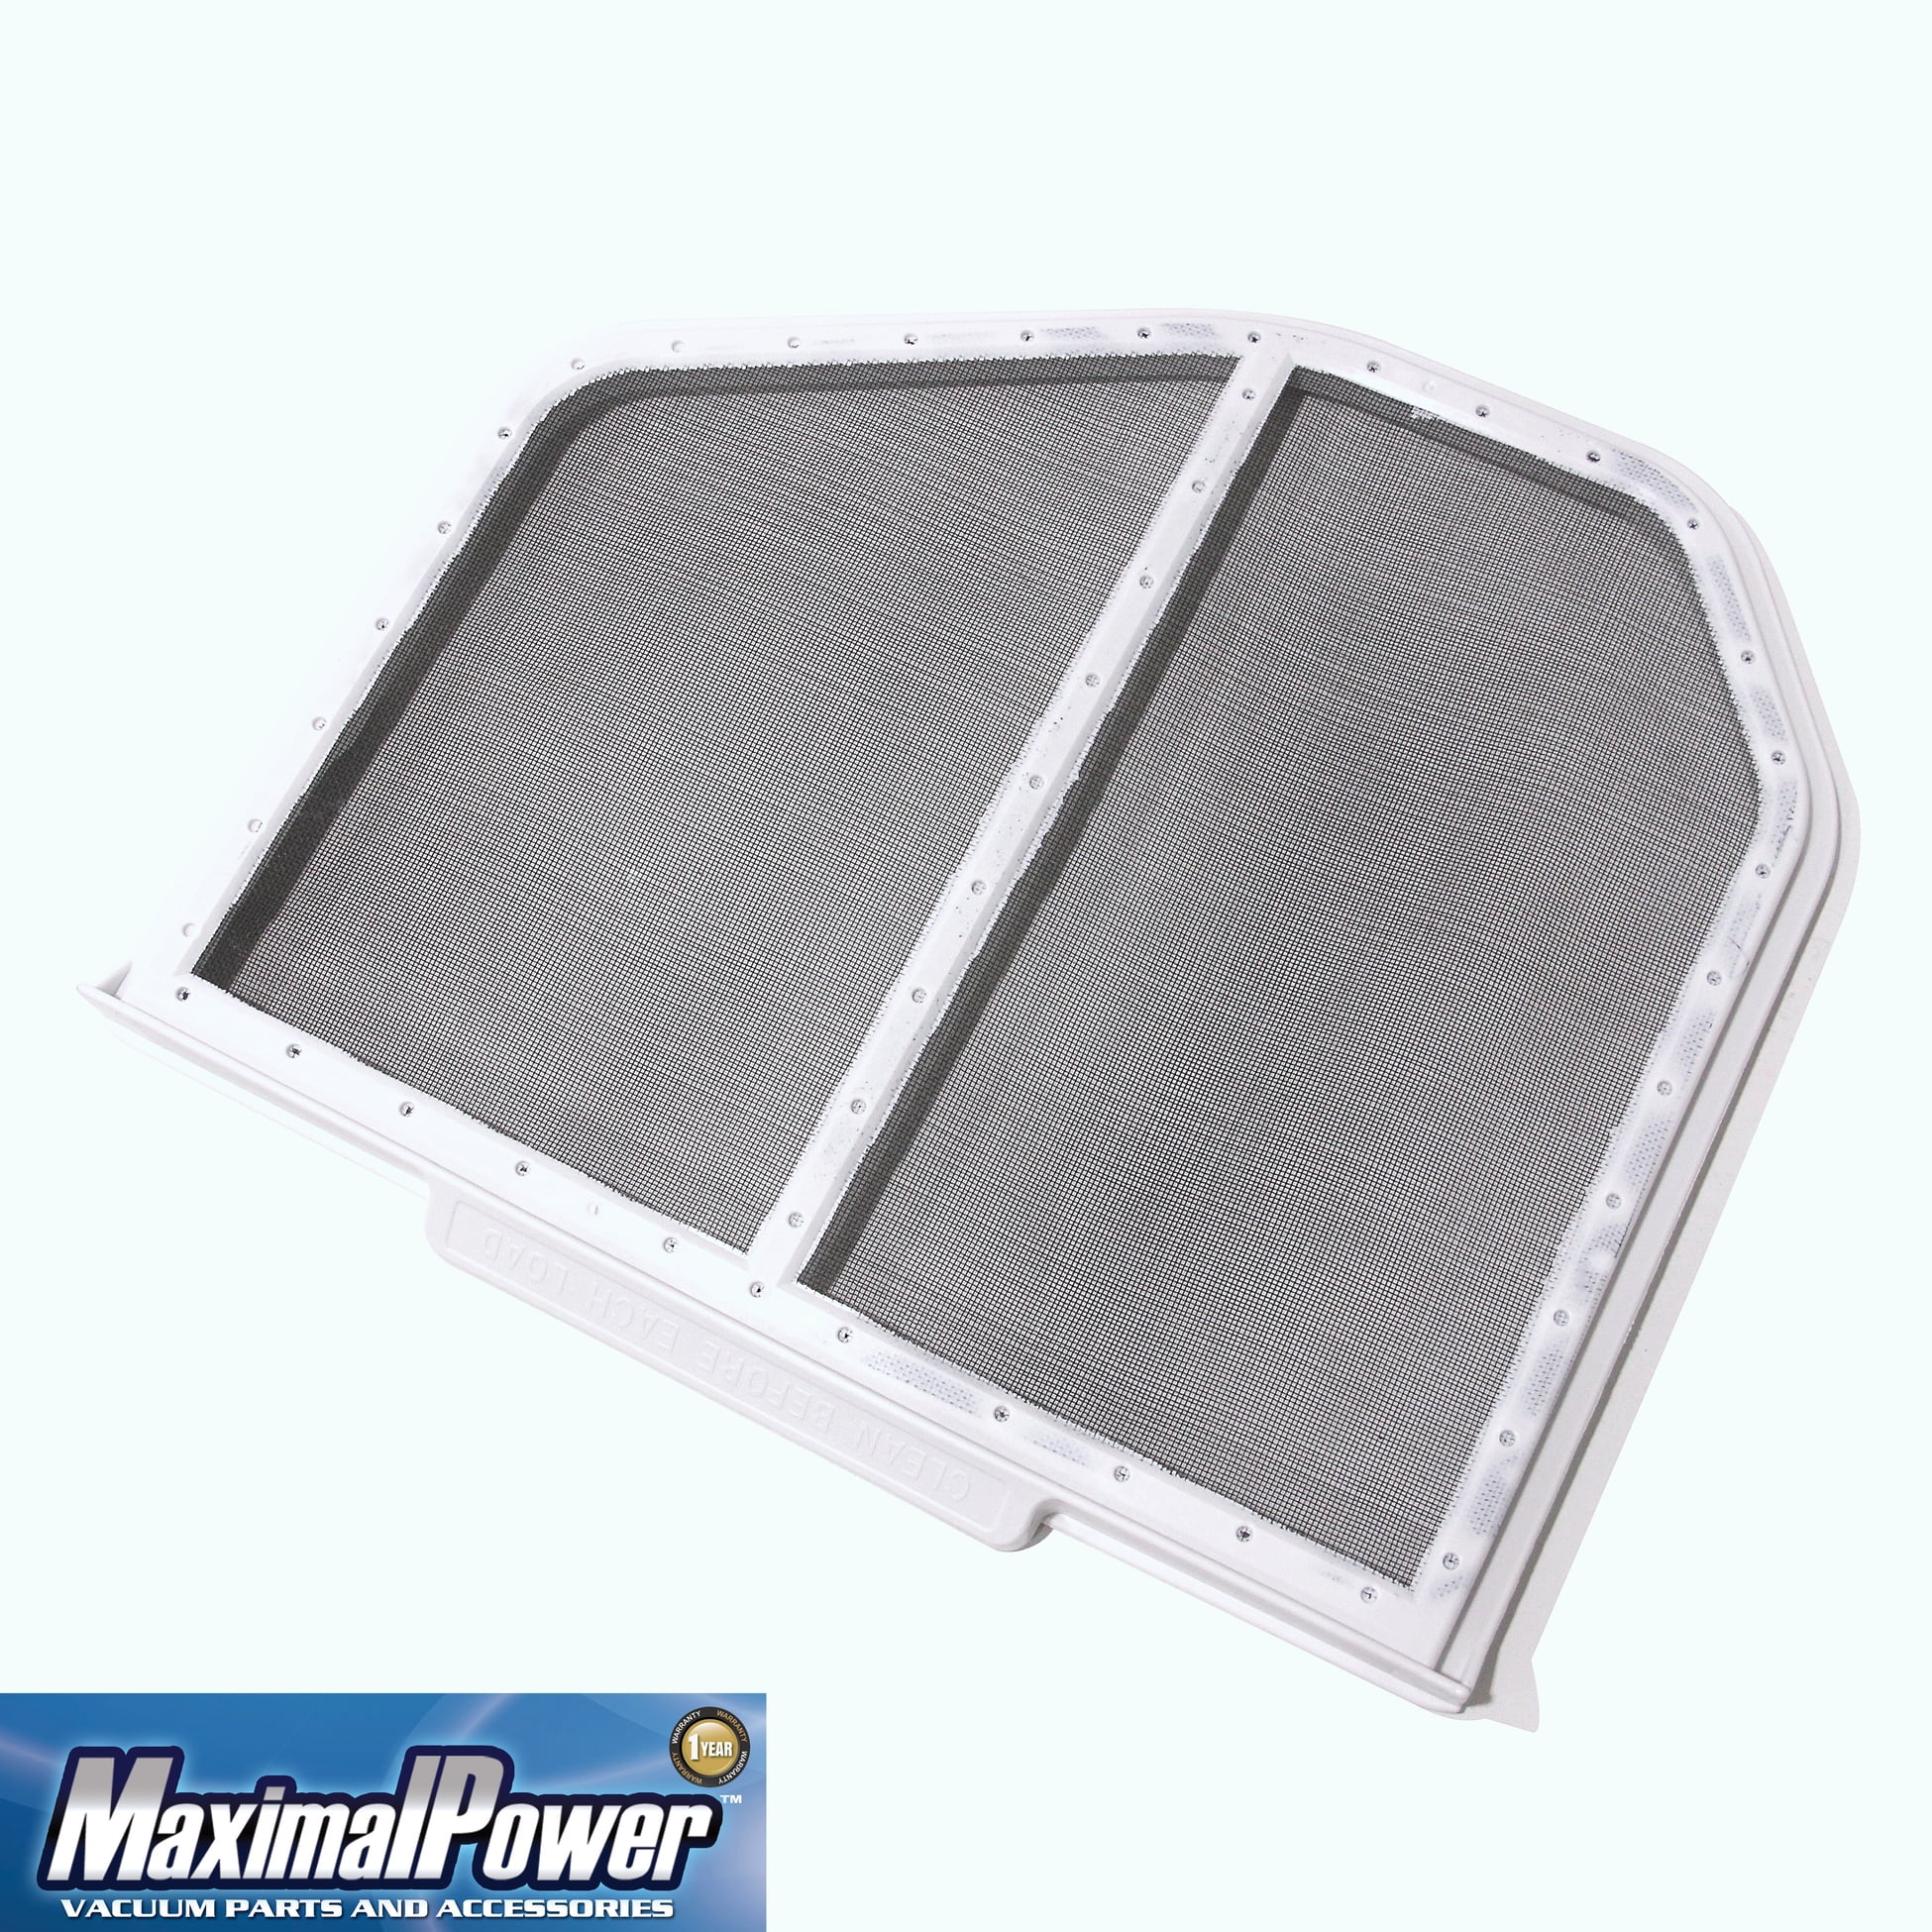 Dryer Lint Filter For Maytag MEDC200XW3 MEDC300XW0 MED5840TW0 Kenmore 80 Series 